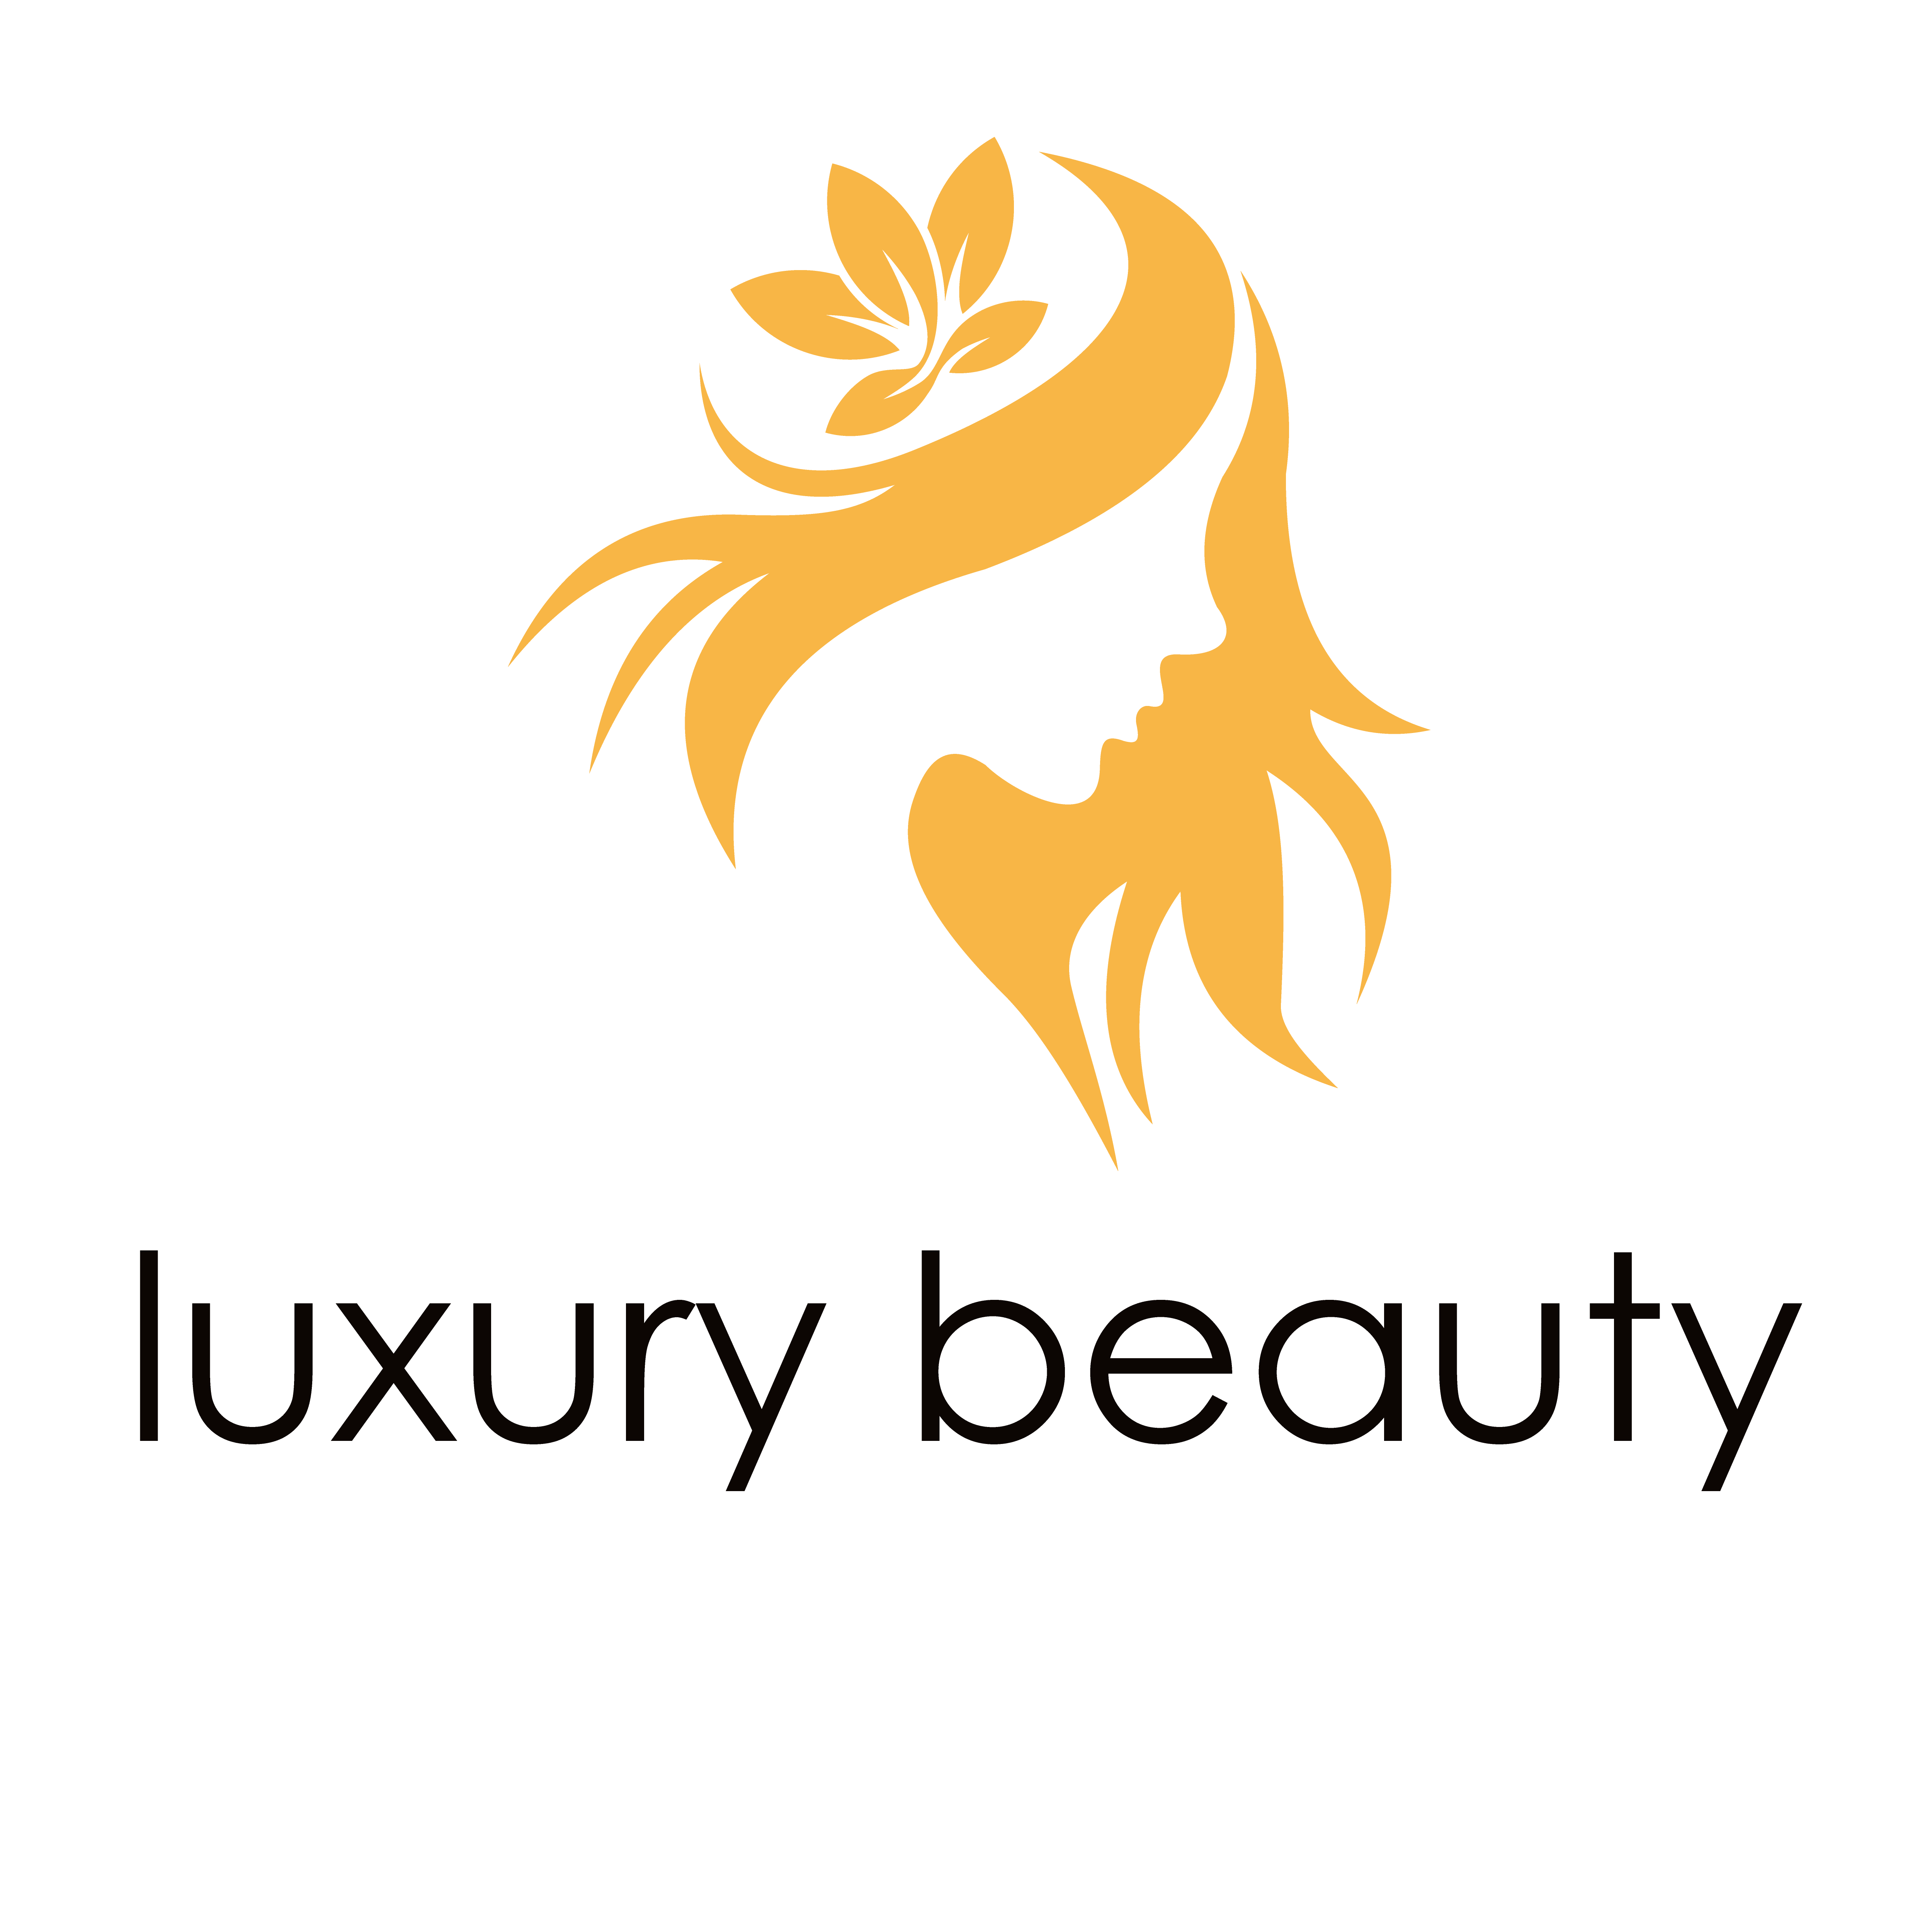 Products Reviews - Luxury beauty items